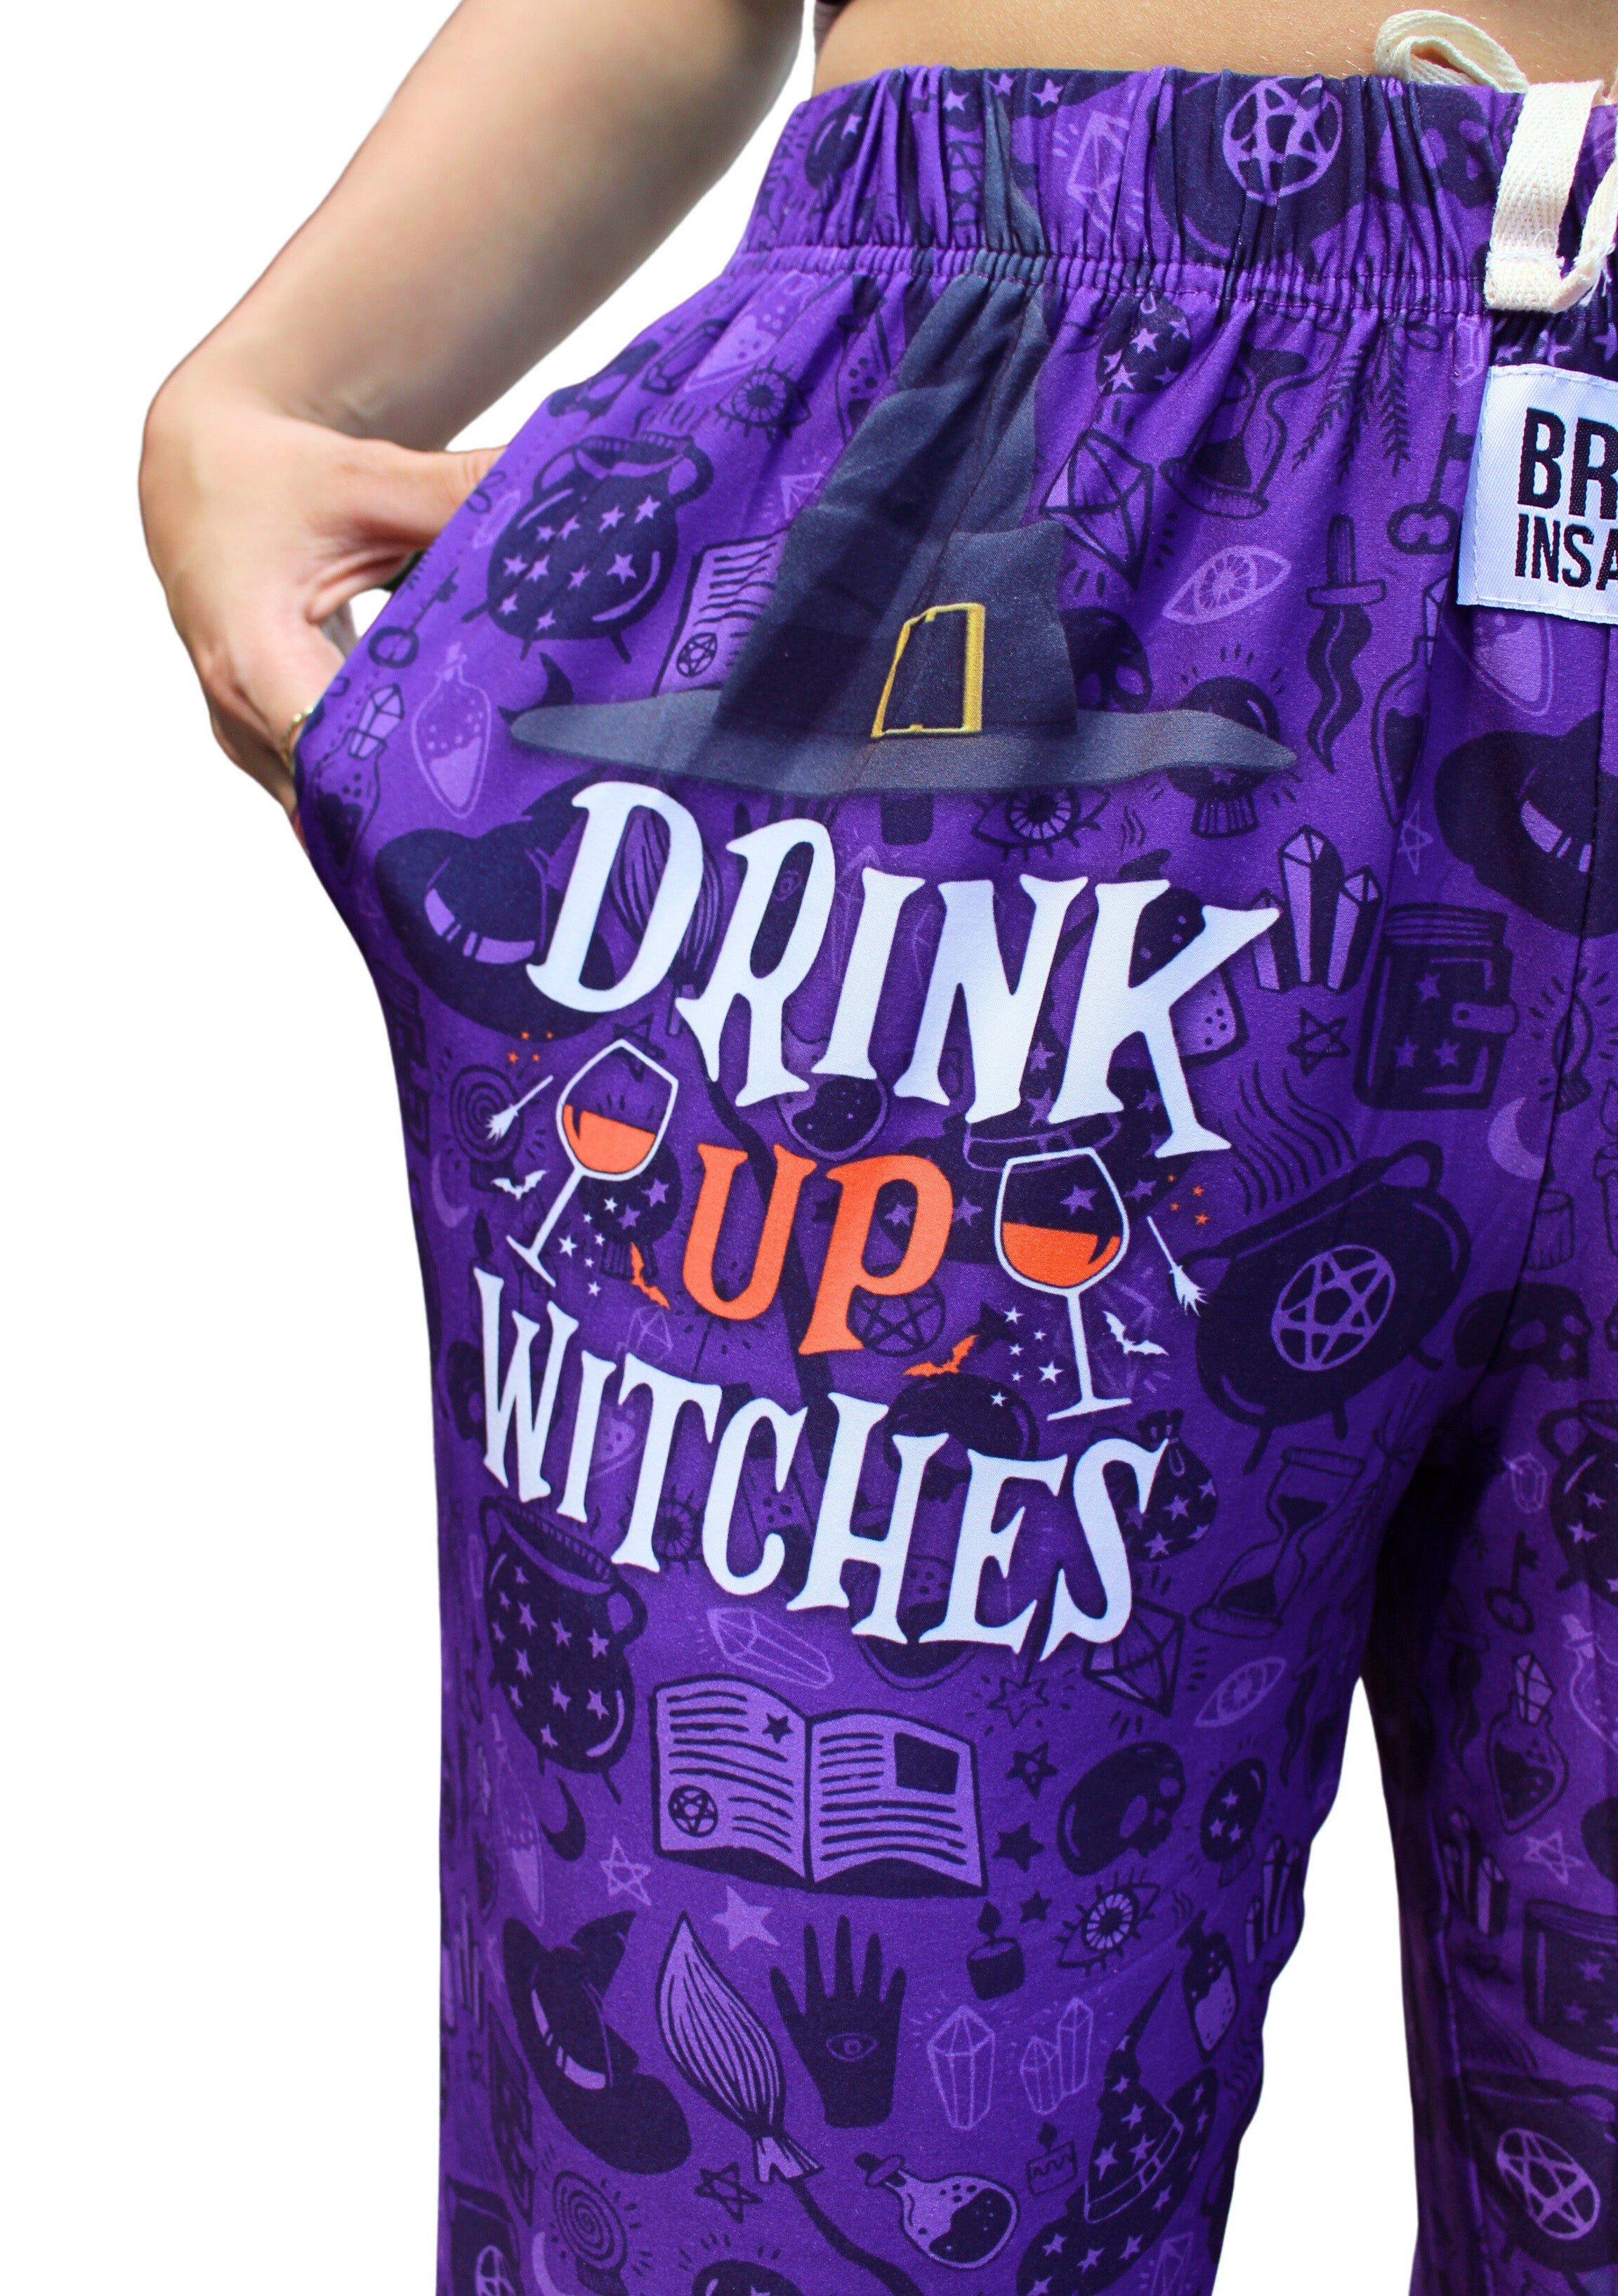 Drink Up Witches Pajama Lounge Pants close up view of "Drink Up Witches" text